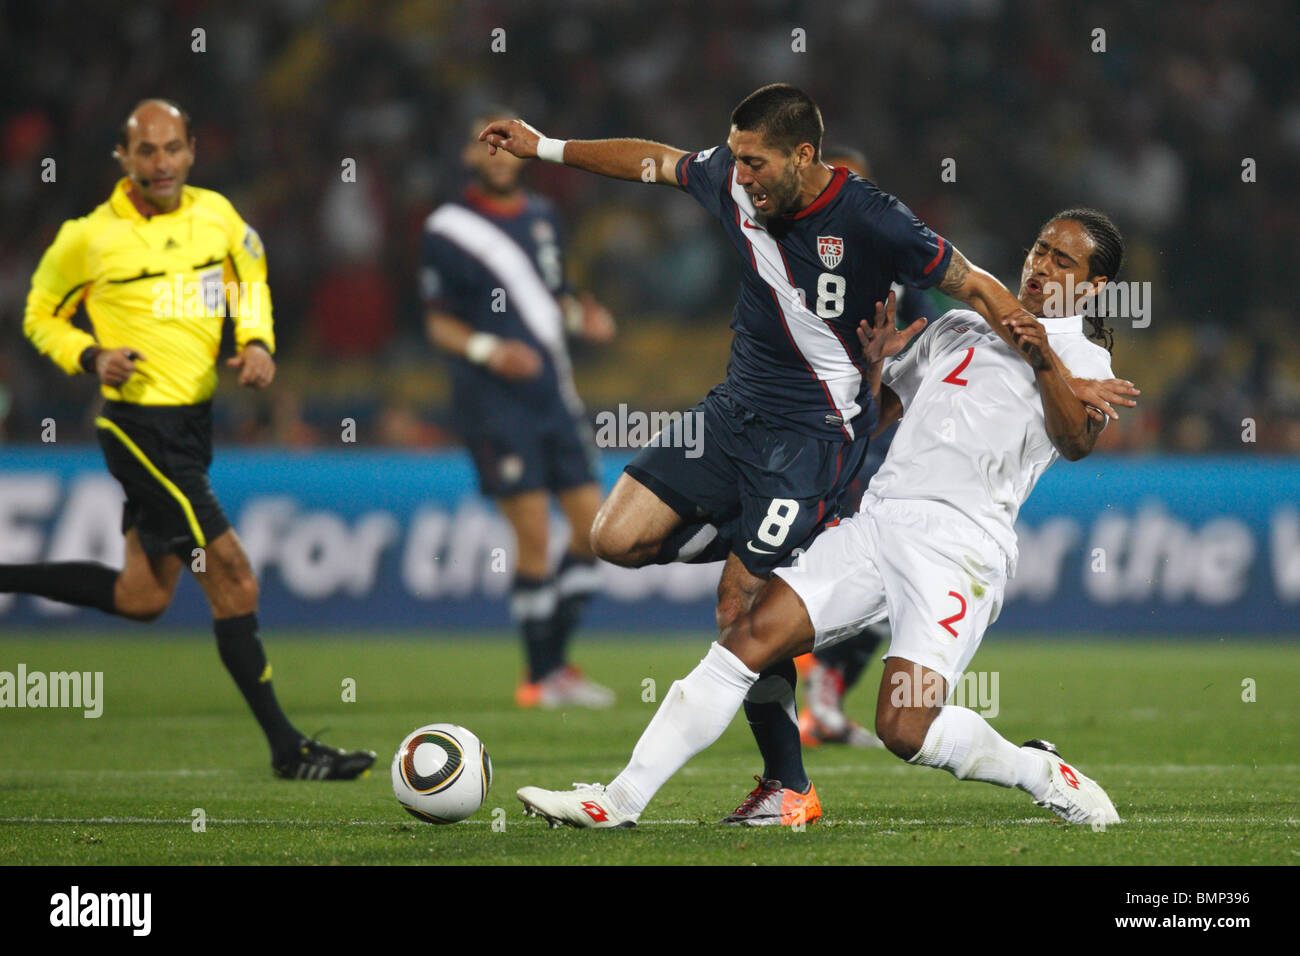 Clint Dempsey of the United States (8) battles Glen Johnson of England (2) during a 2010 FIFA World Cup football match. Stock Photo